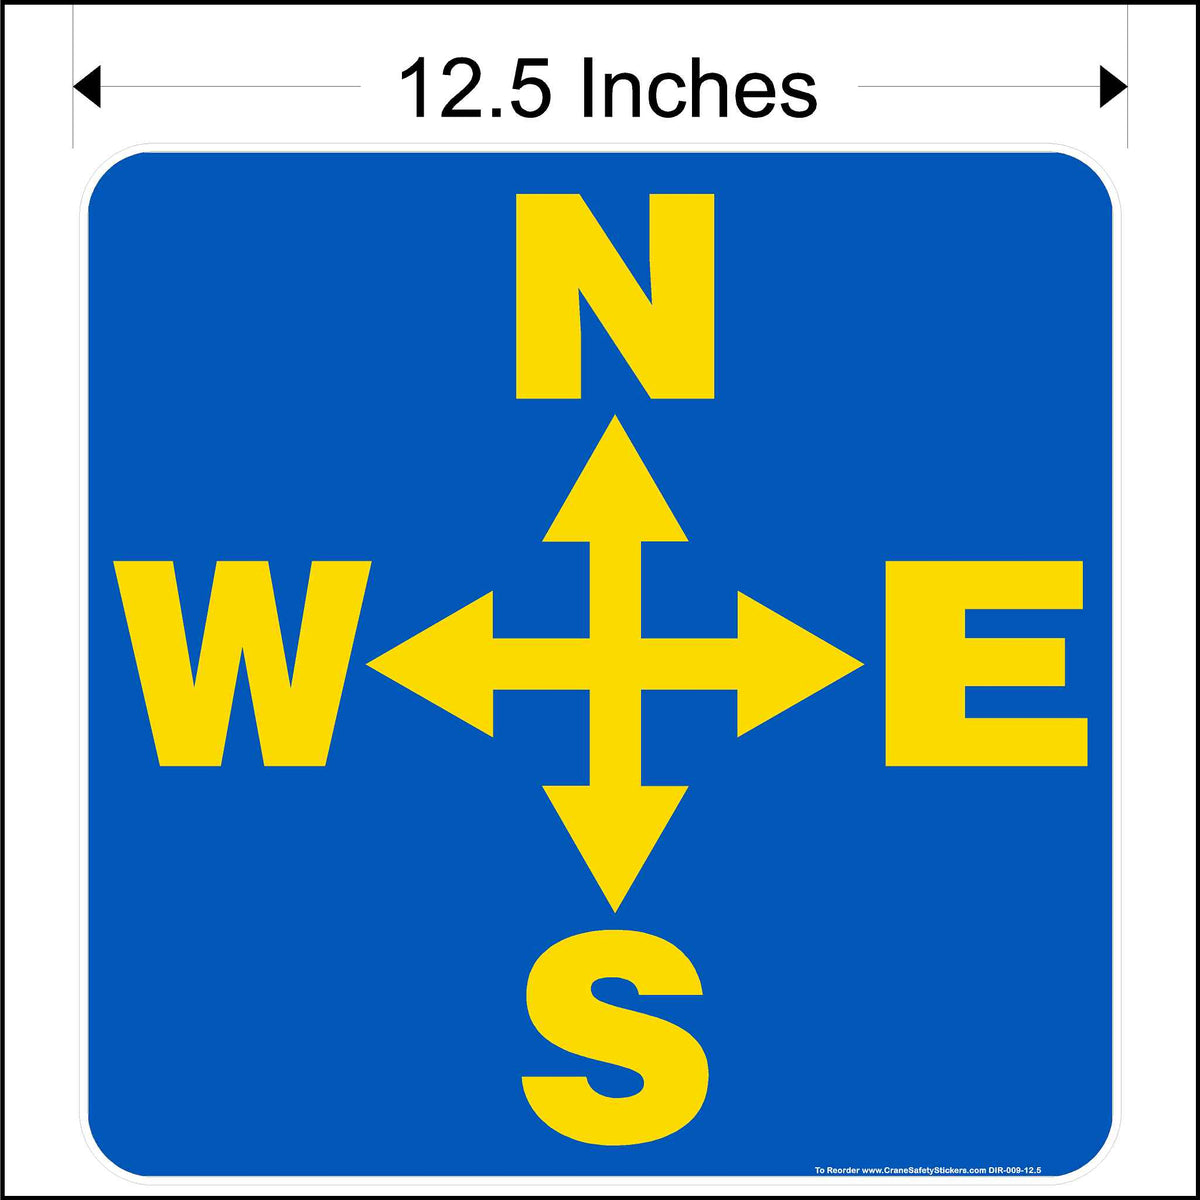 12.5 inch overhead crane directional decal printed with yellow north, south, east, and west arrows on a blue background.